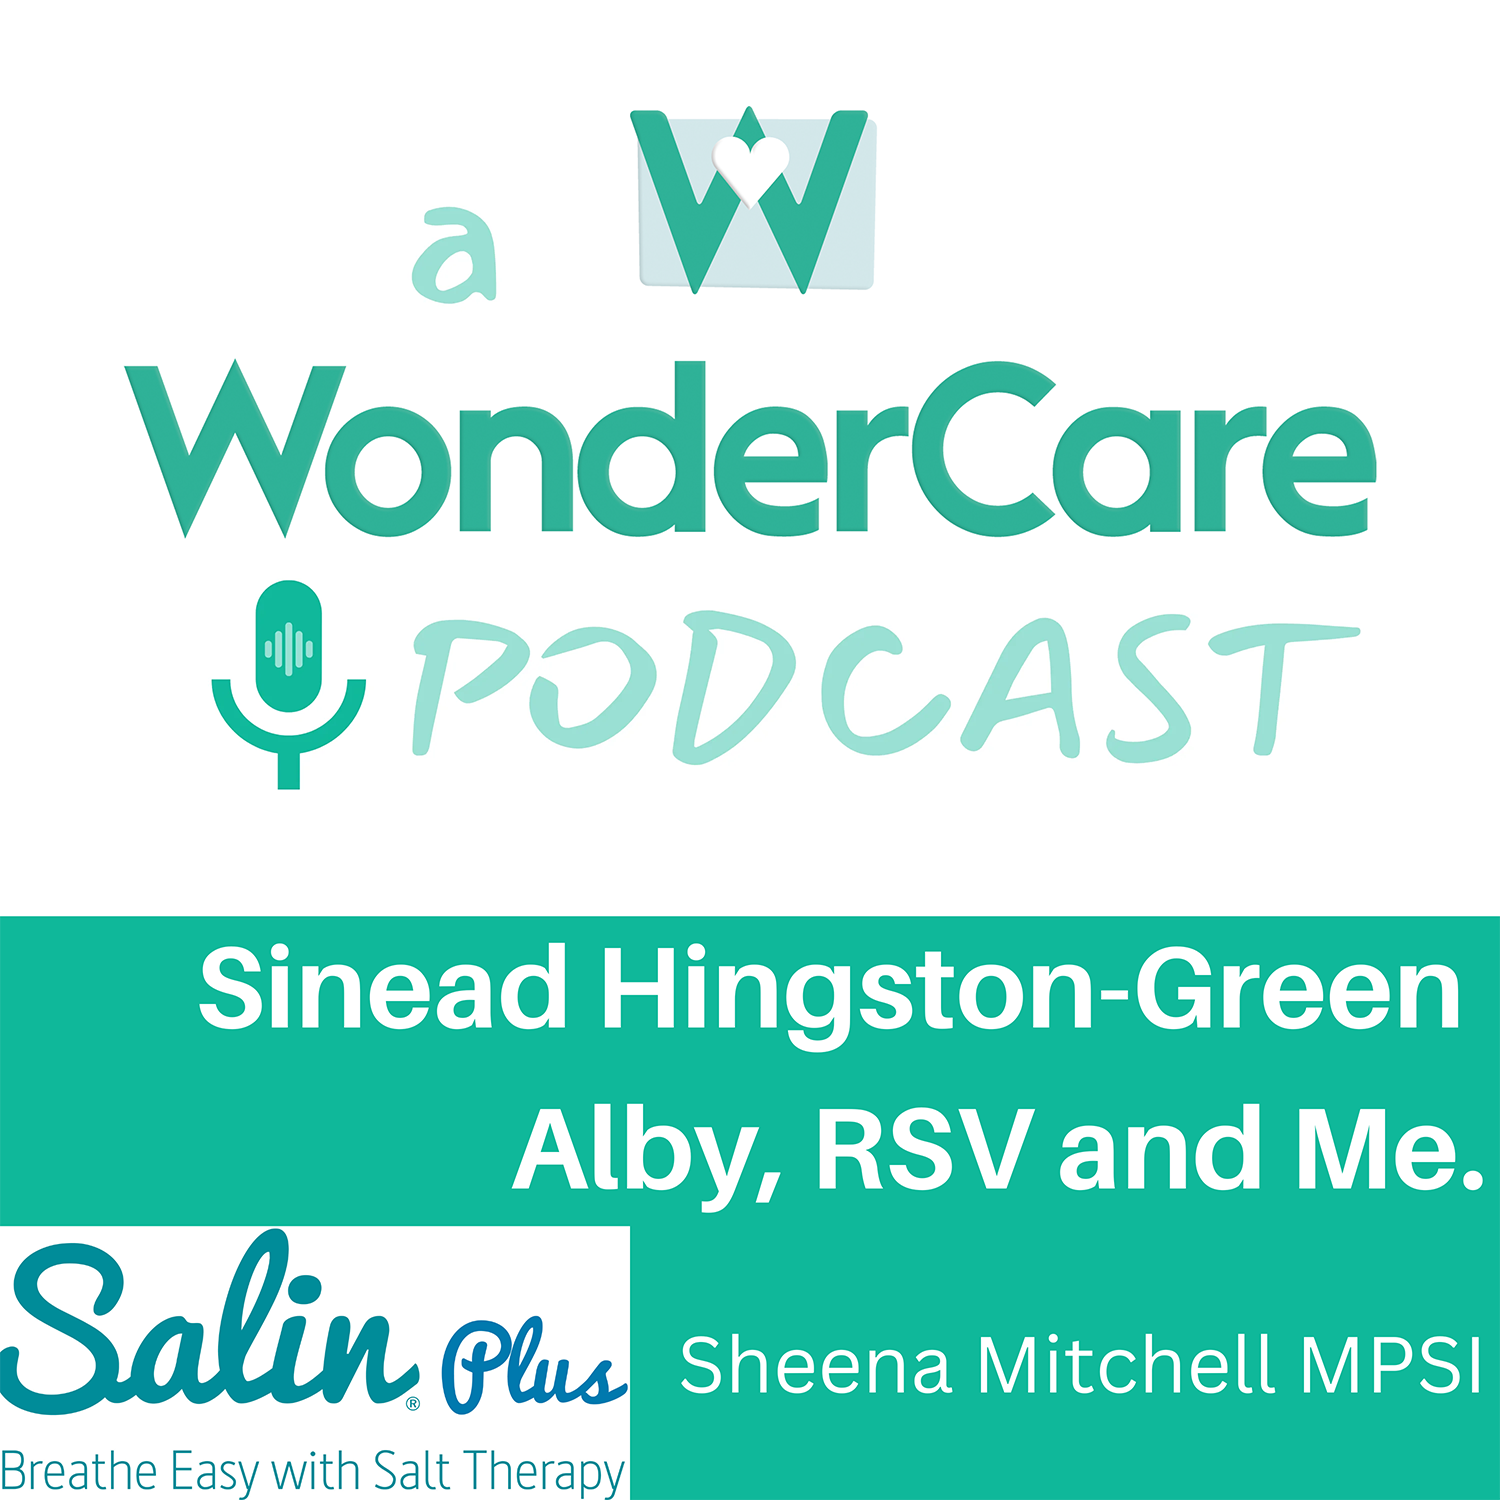 Real lives: Sinead Hingston-Green Alby, RSV, and Me